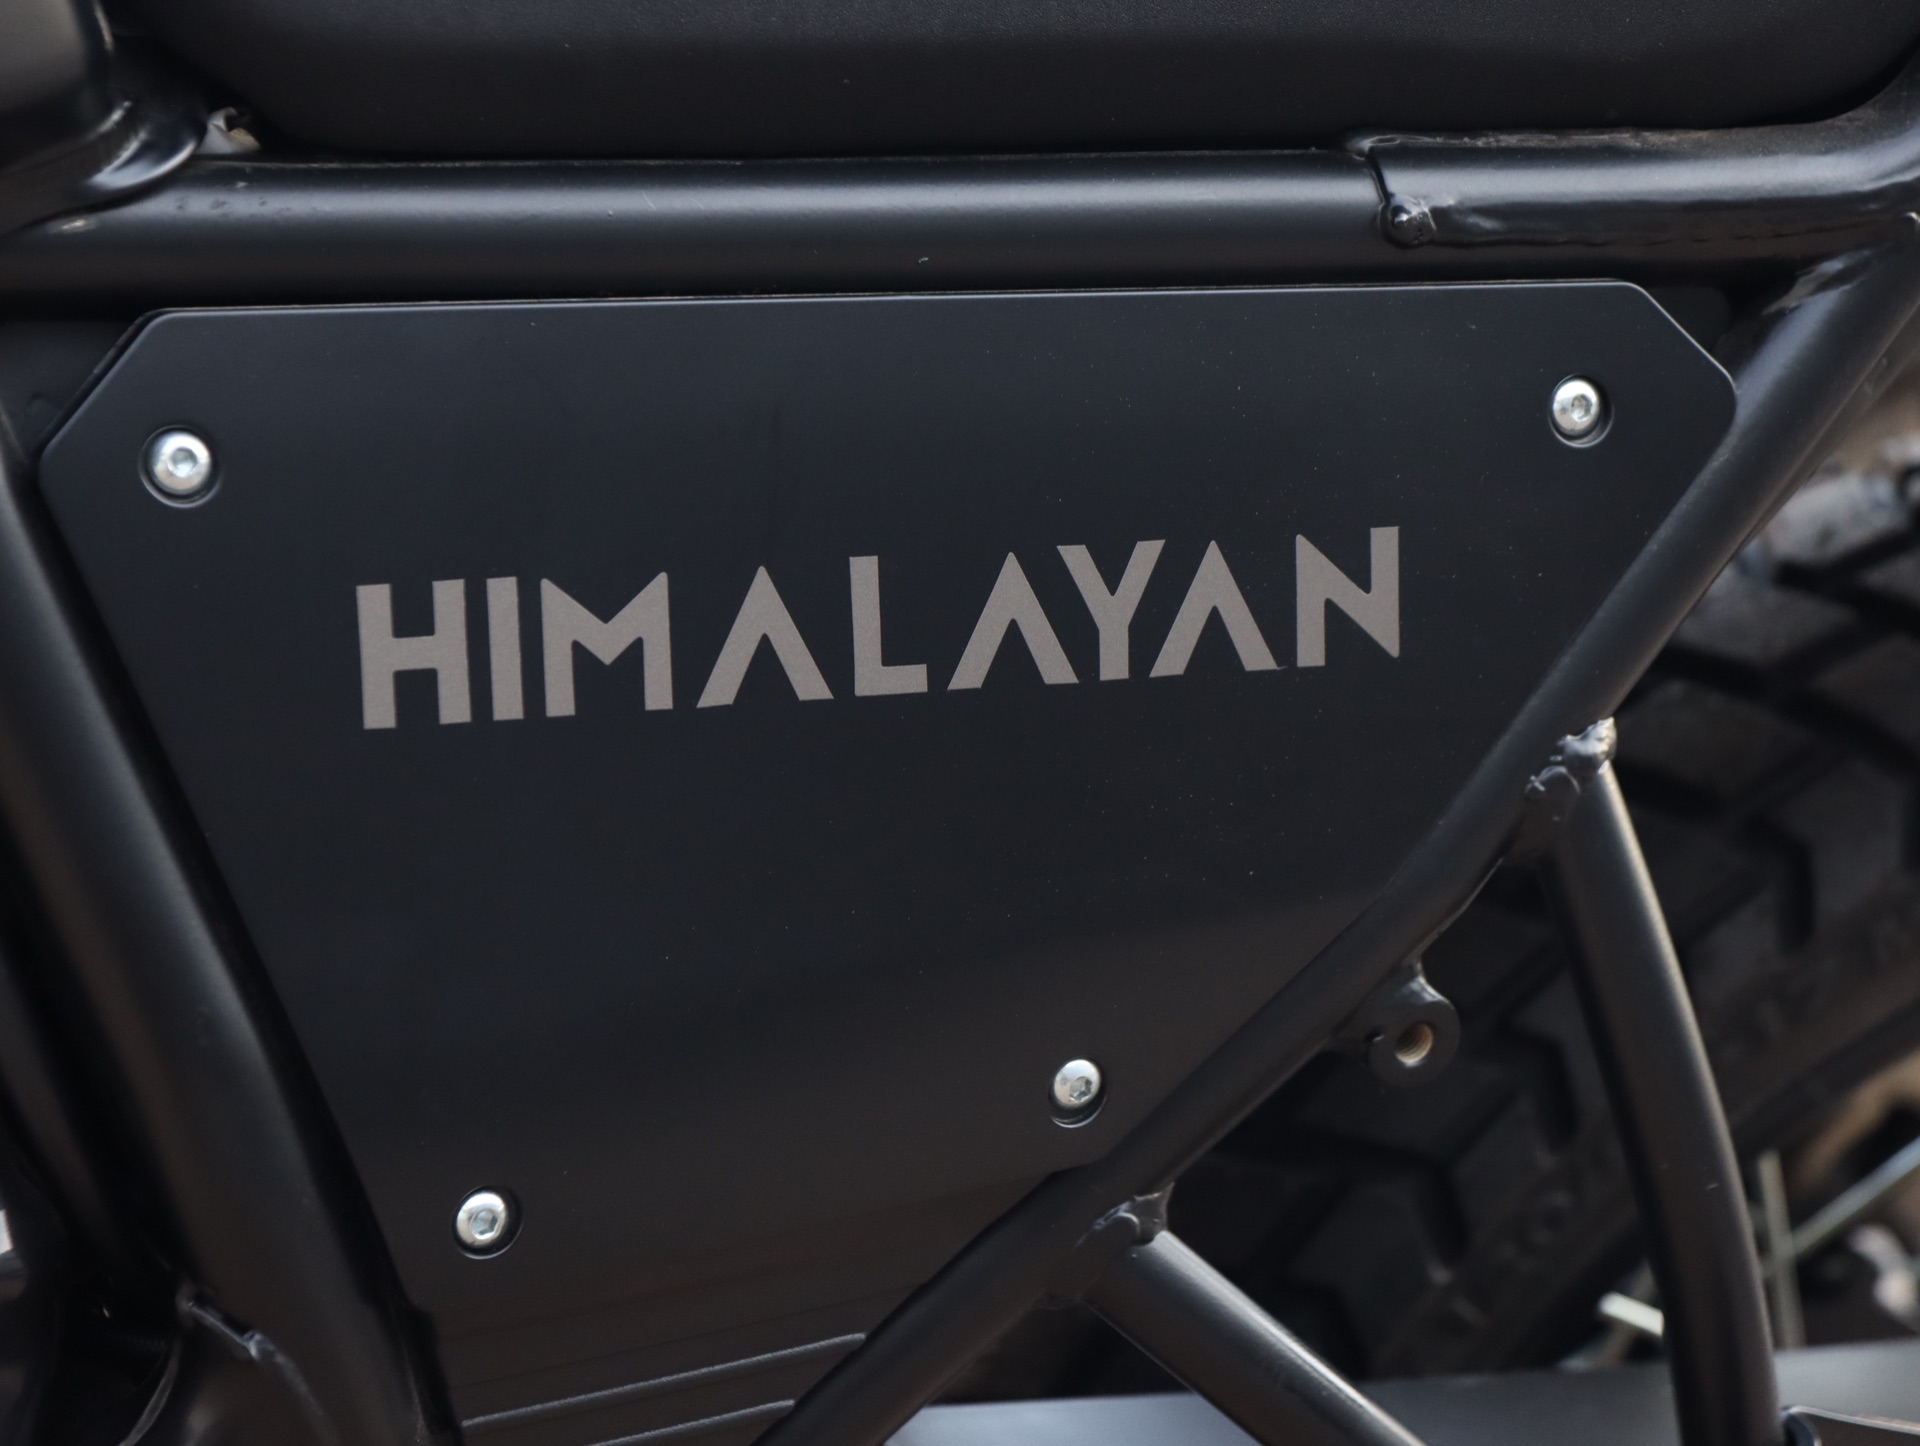 2022 Royal Enfield Himalayan in Enfield, Connecticut - Photo 14